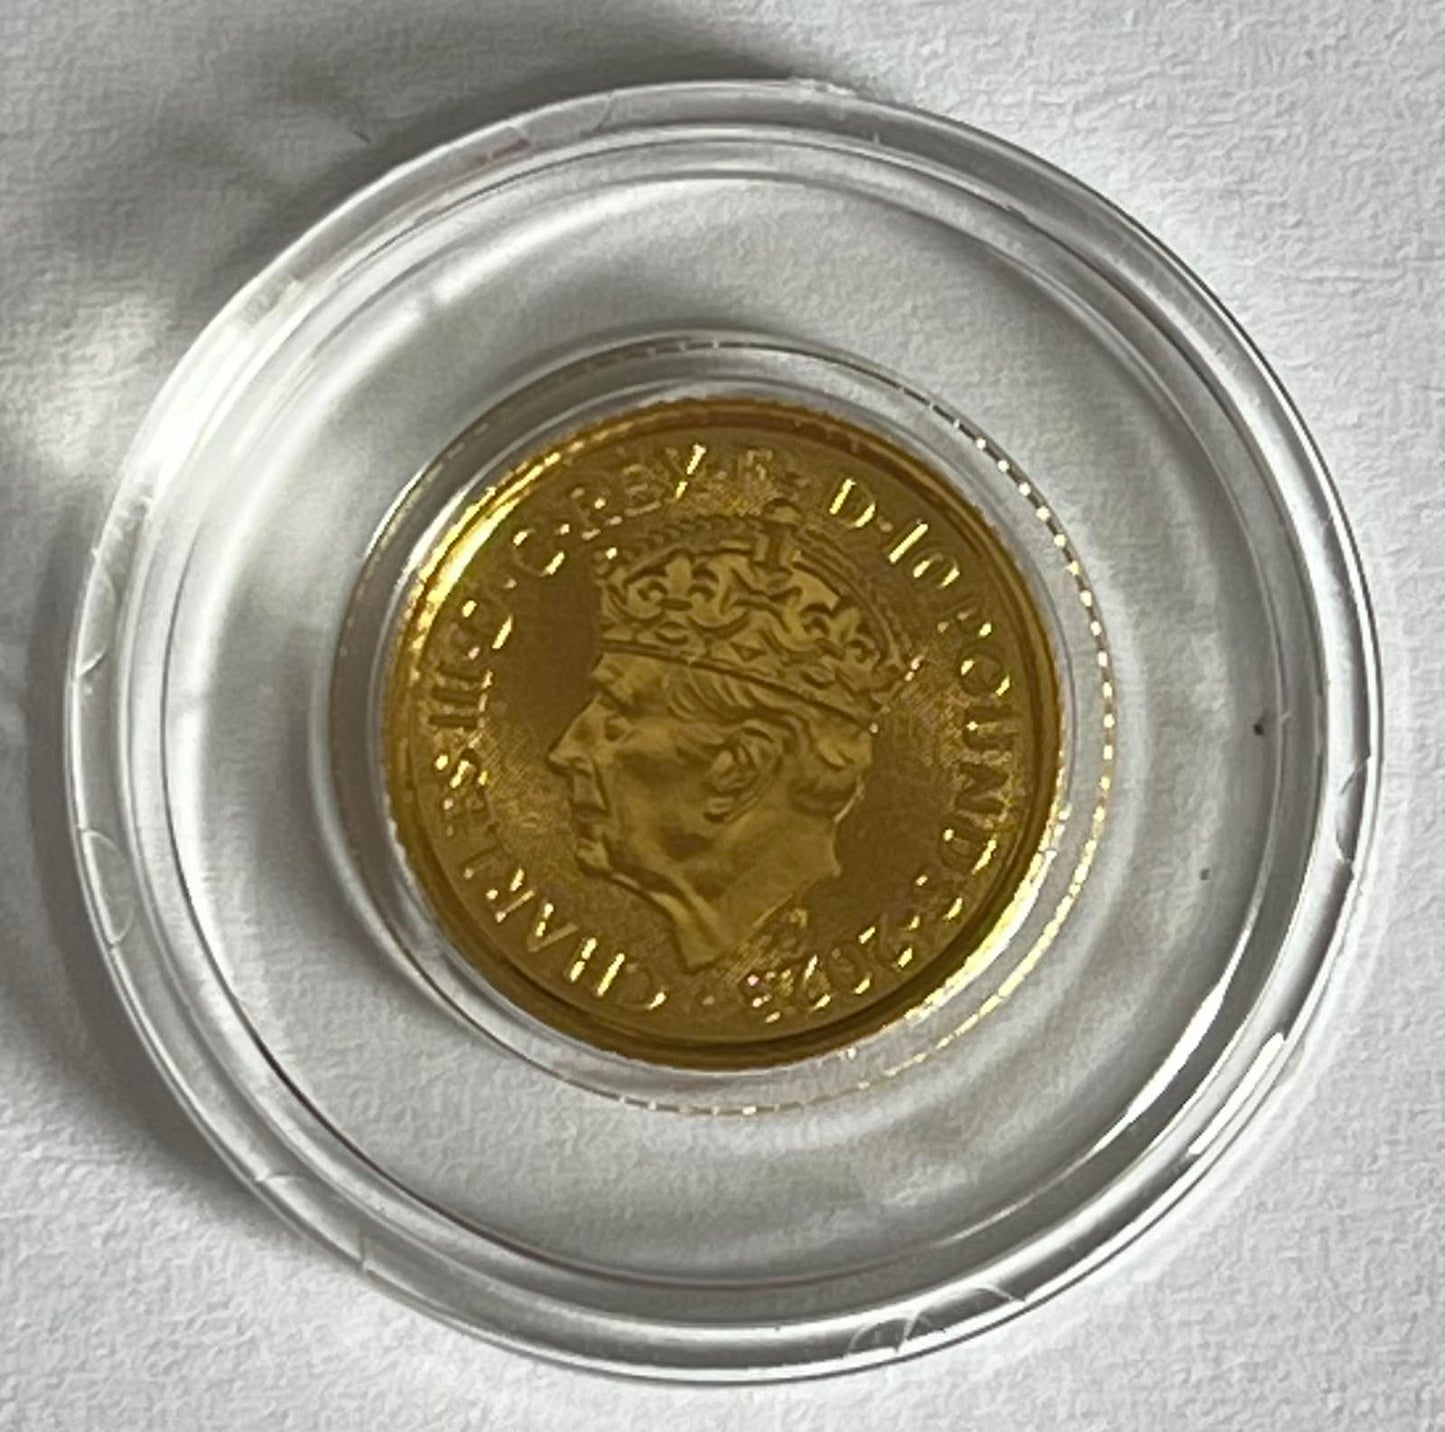 2023 Great Britain The Coronation of His Majesty King Charles III 1/10 oz Gold Coin BU in Capsule